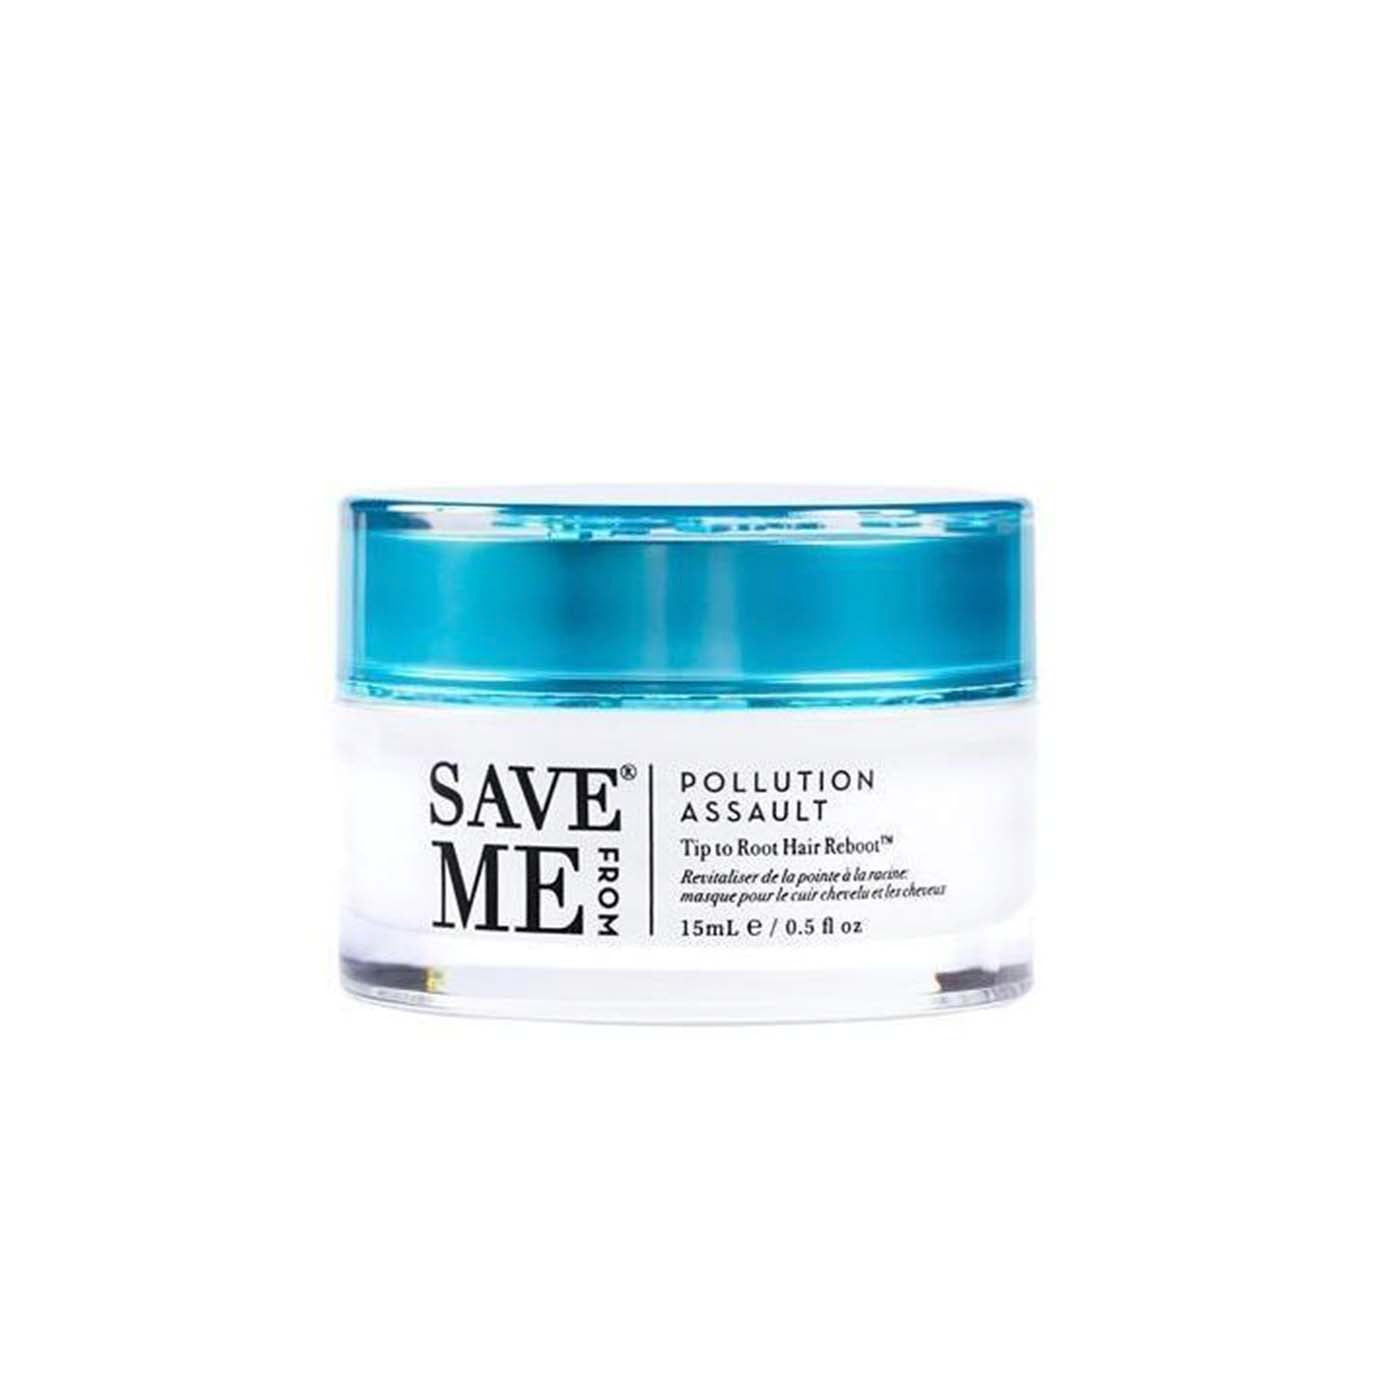 POLLUTION ASSAULT Tip to Root Hair Reboot 0.5 fl oz | Save Me From